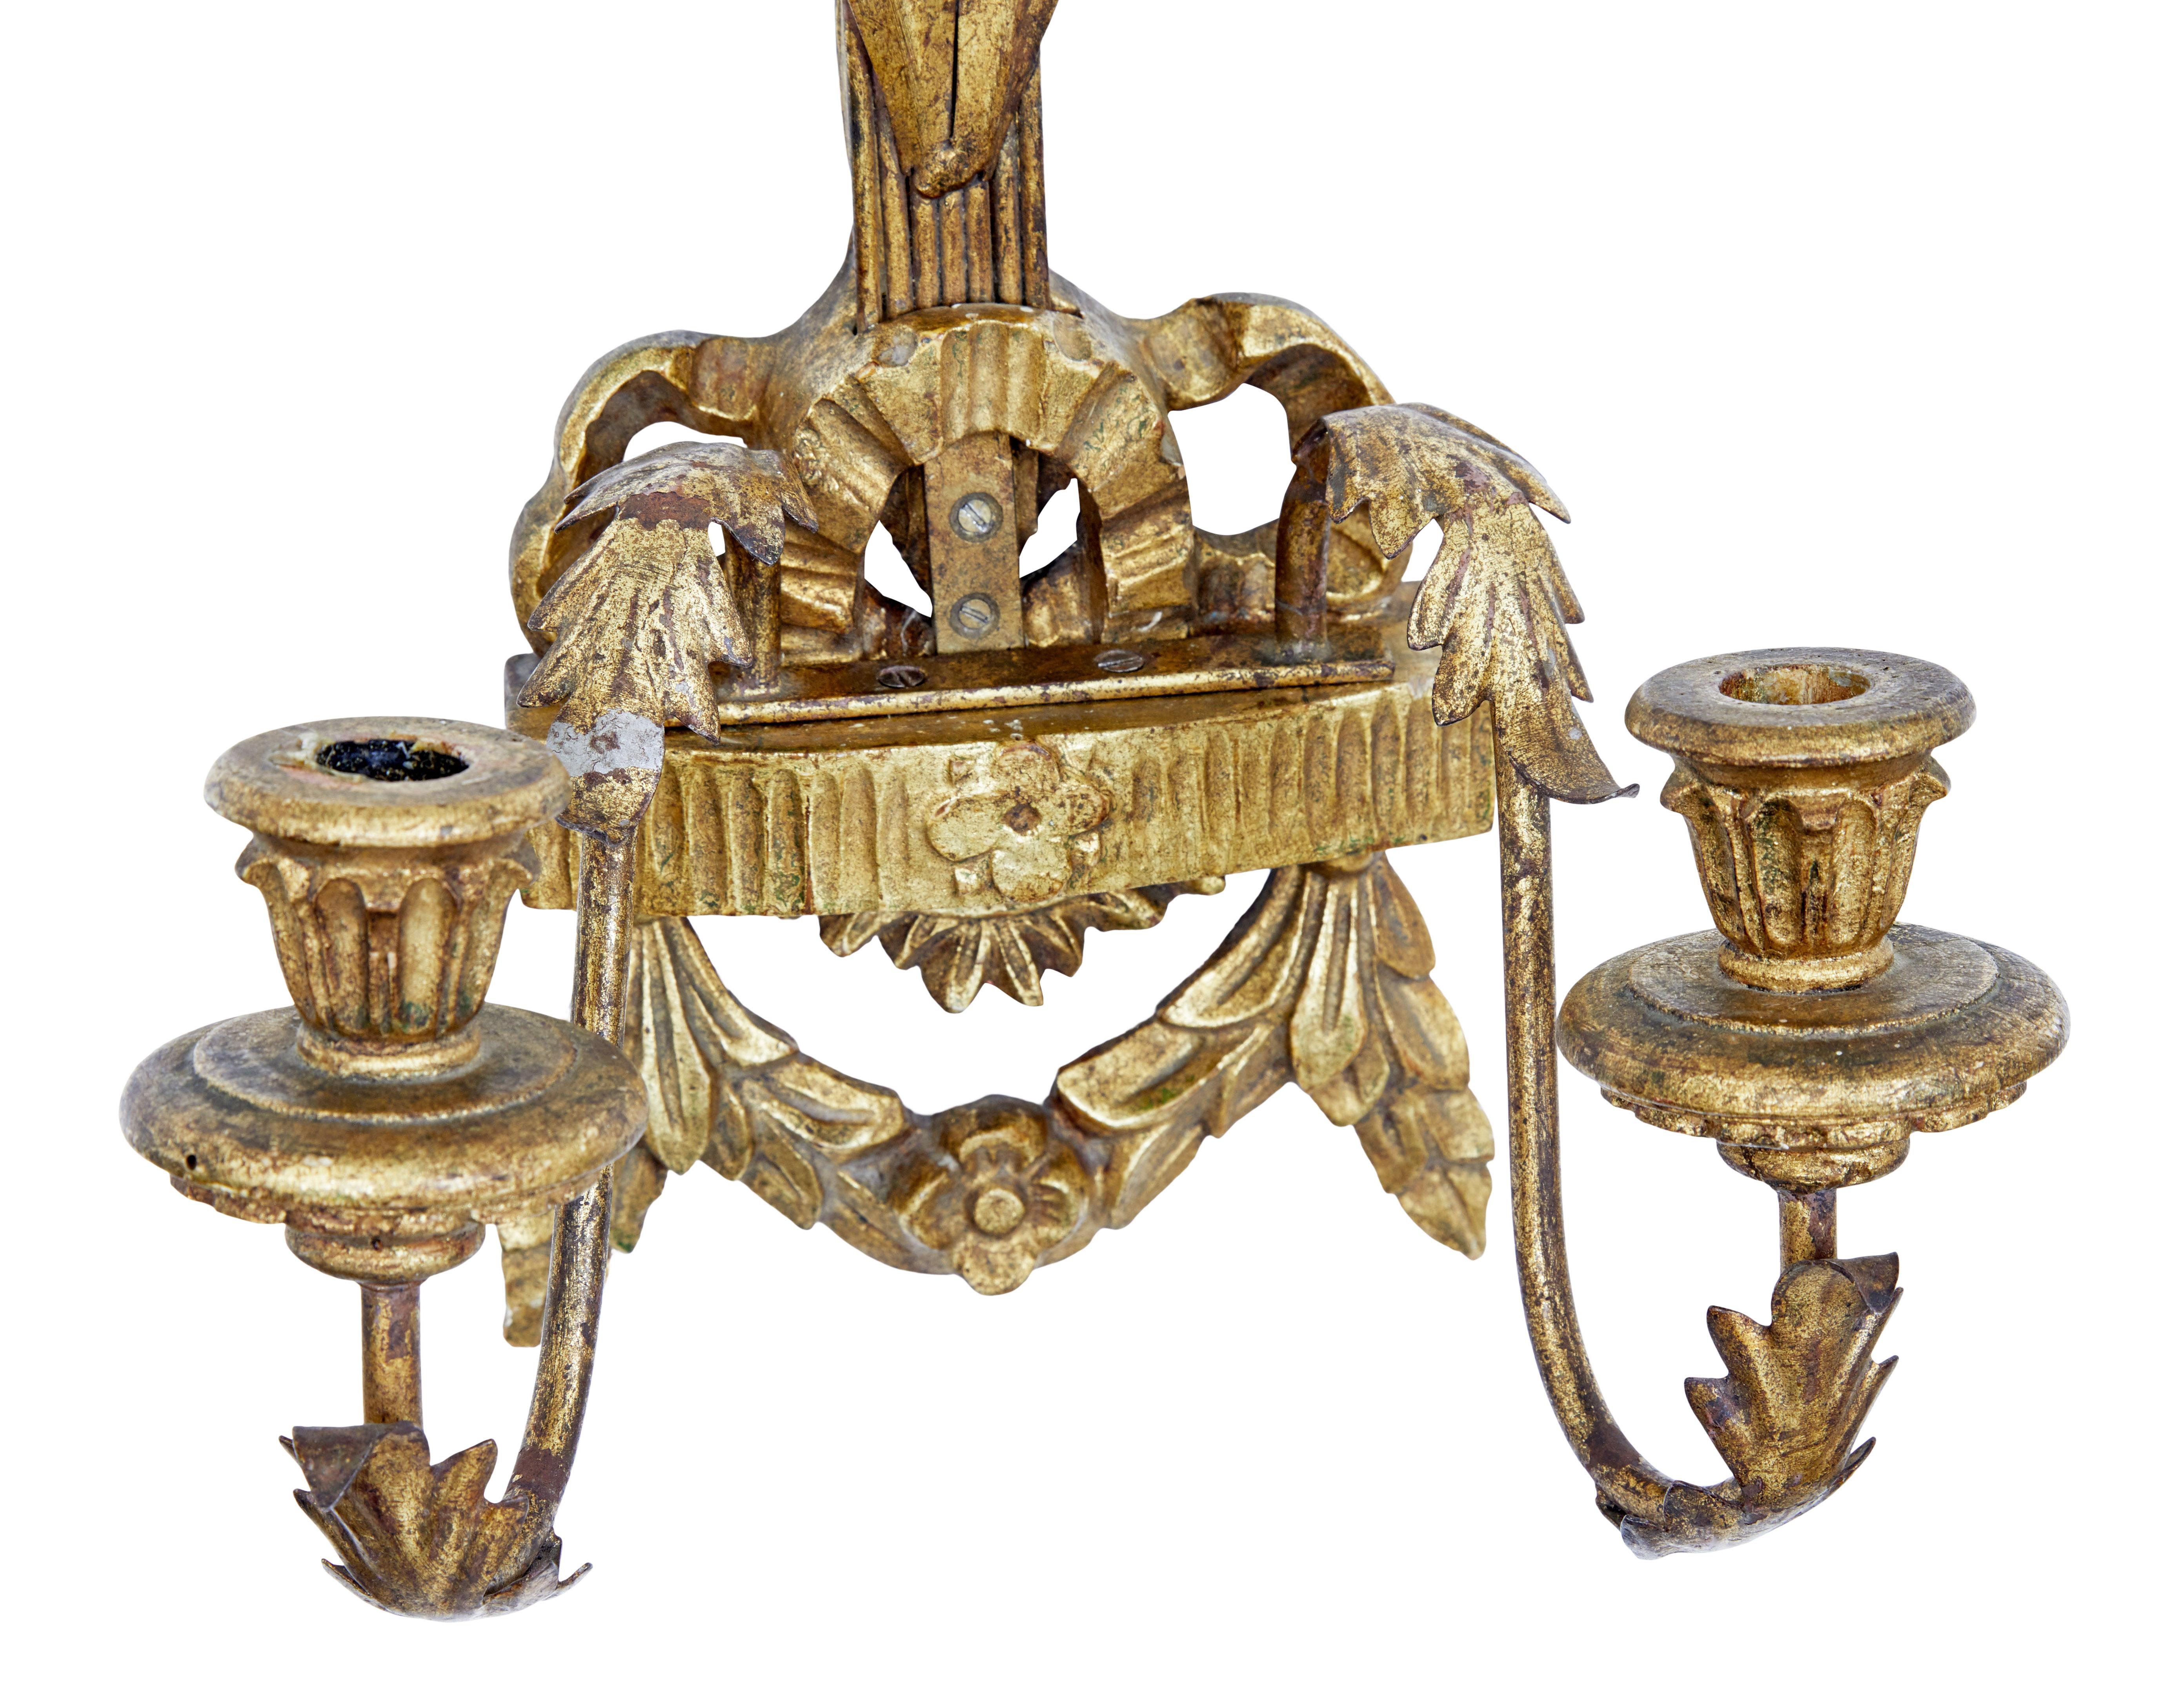 Early 20th century carved wood and gilt metal sconce, circa 1910.

Decorative 2 arm wall sconce. Decorated with ears of corn onto the main body of swags and leaves. Made with carved wood and metal elements.

Some expected gilt loss and off